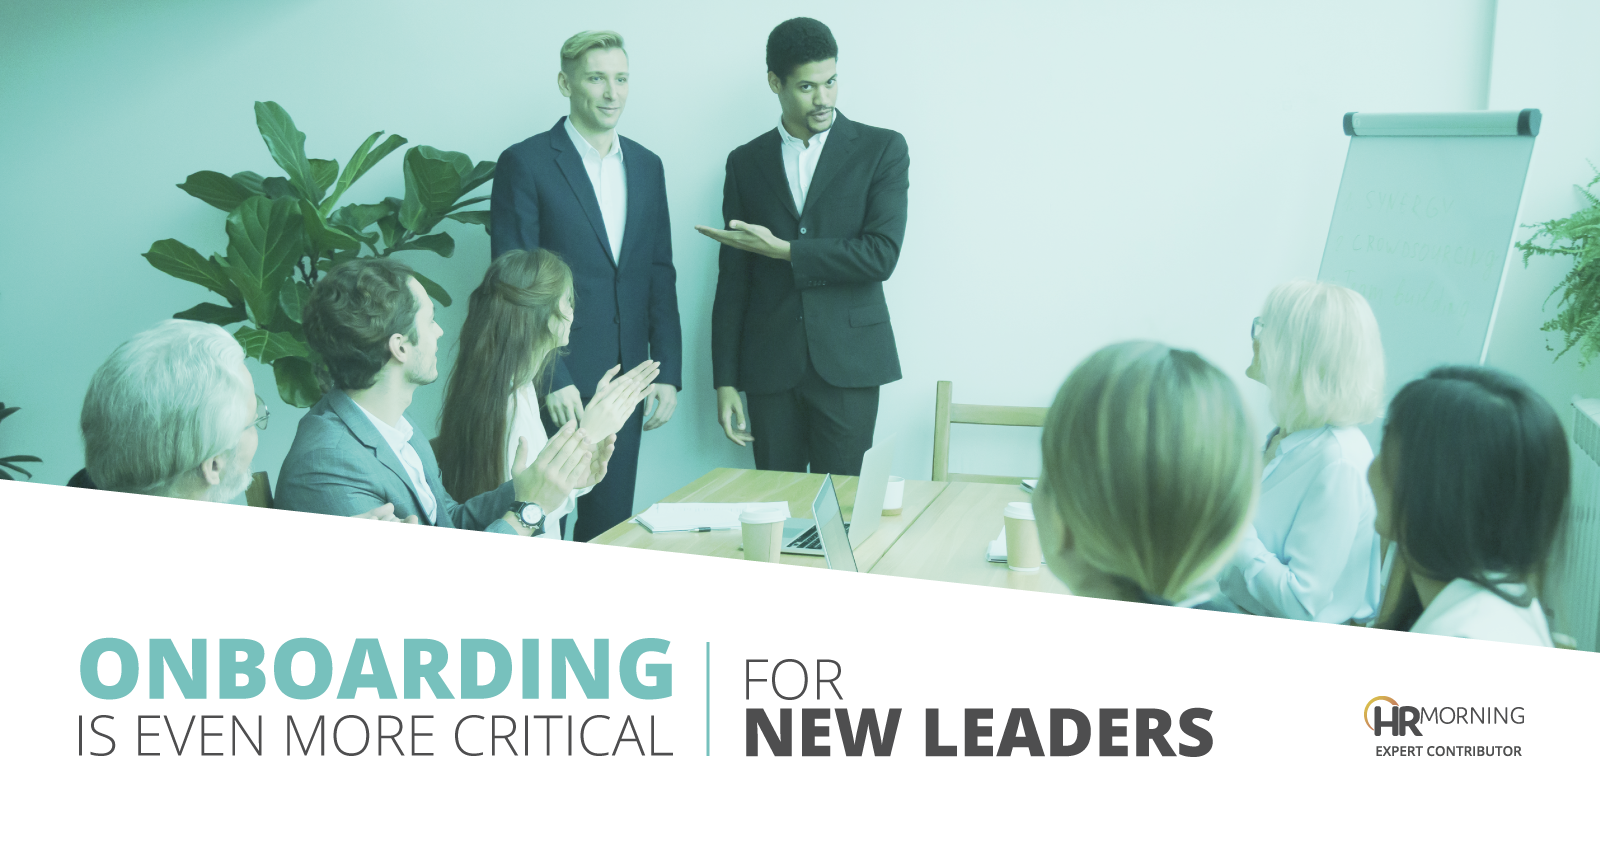 Onboarding is even more critical for new leaders